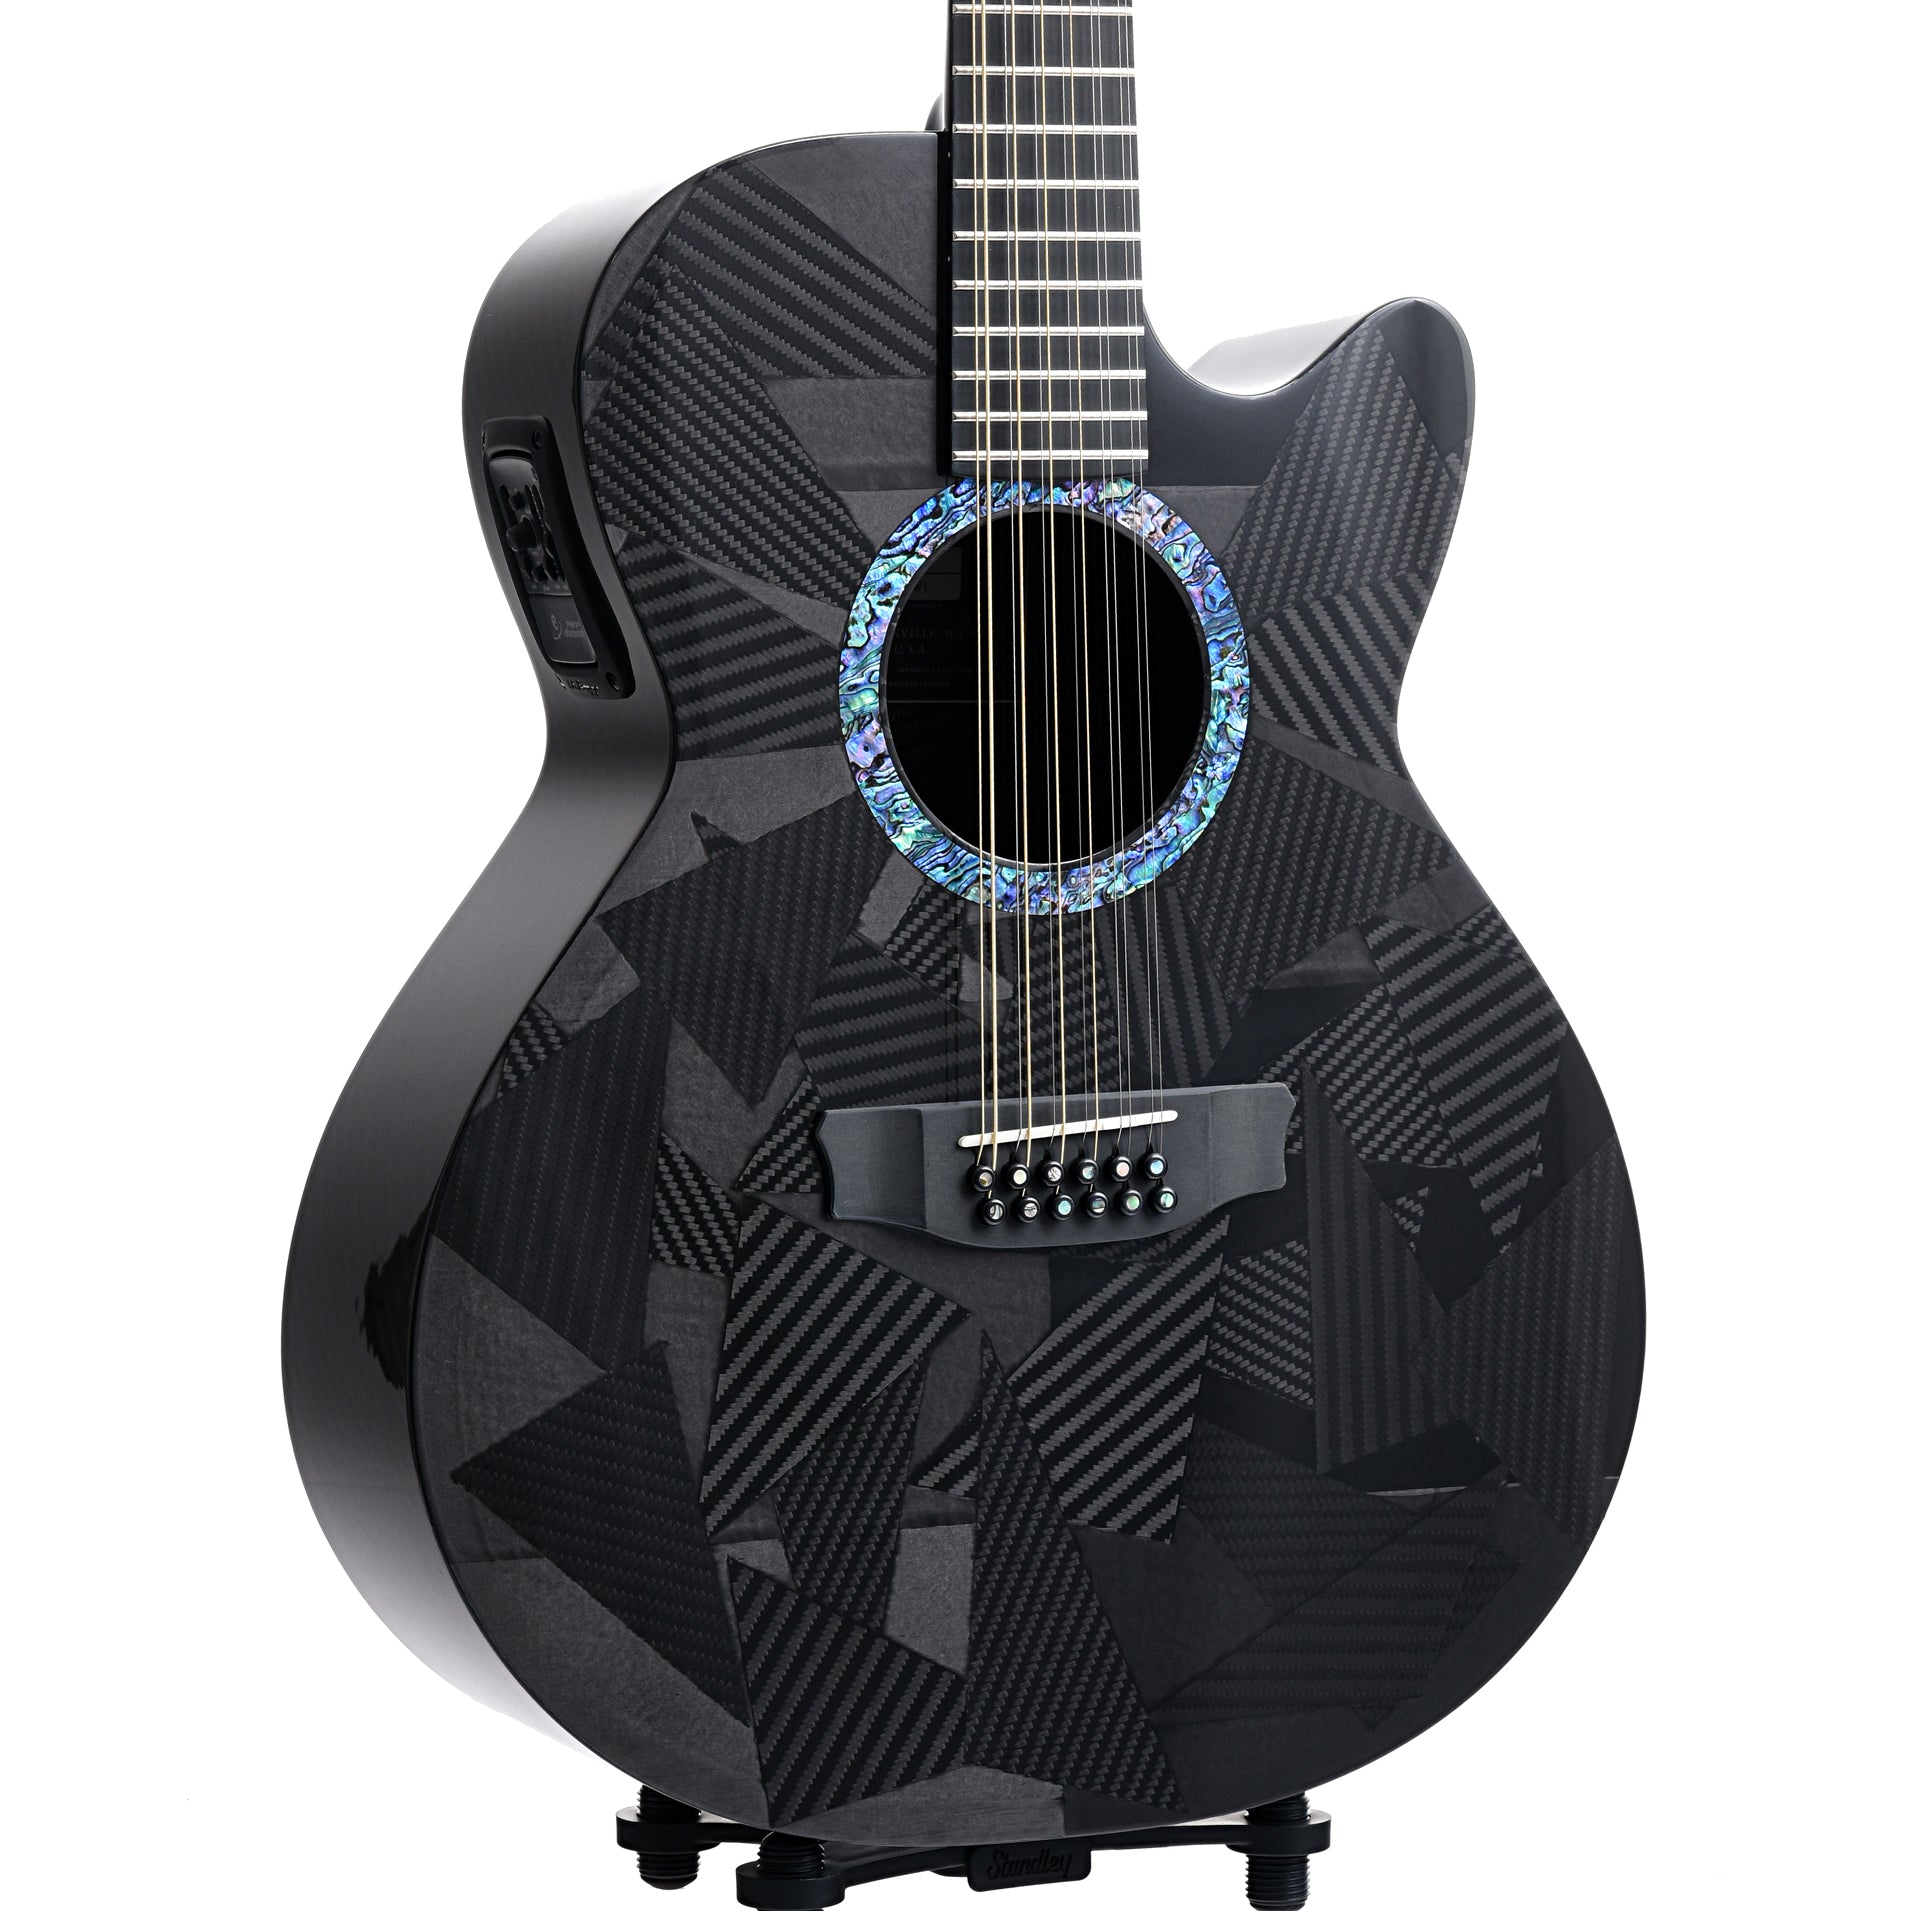  Front and side of Rainsong Black Ice WS3000 12-string